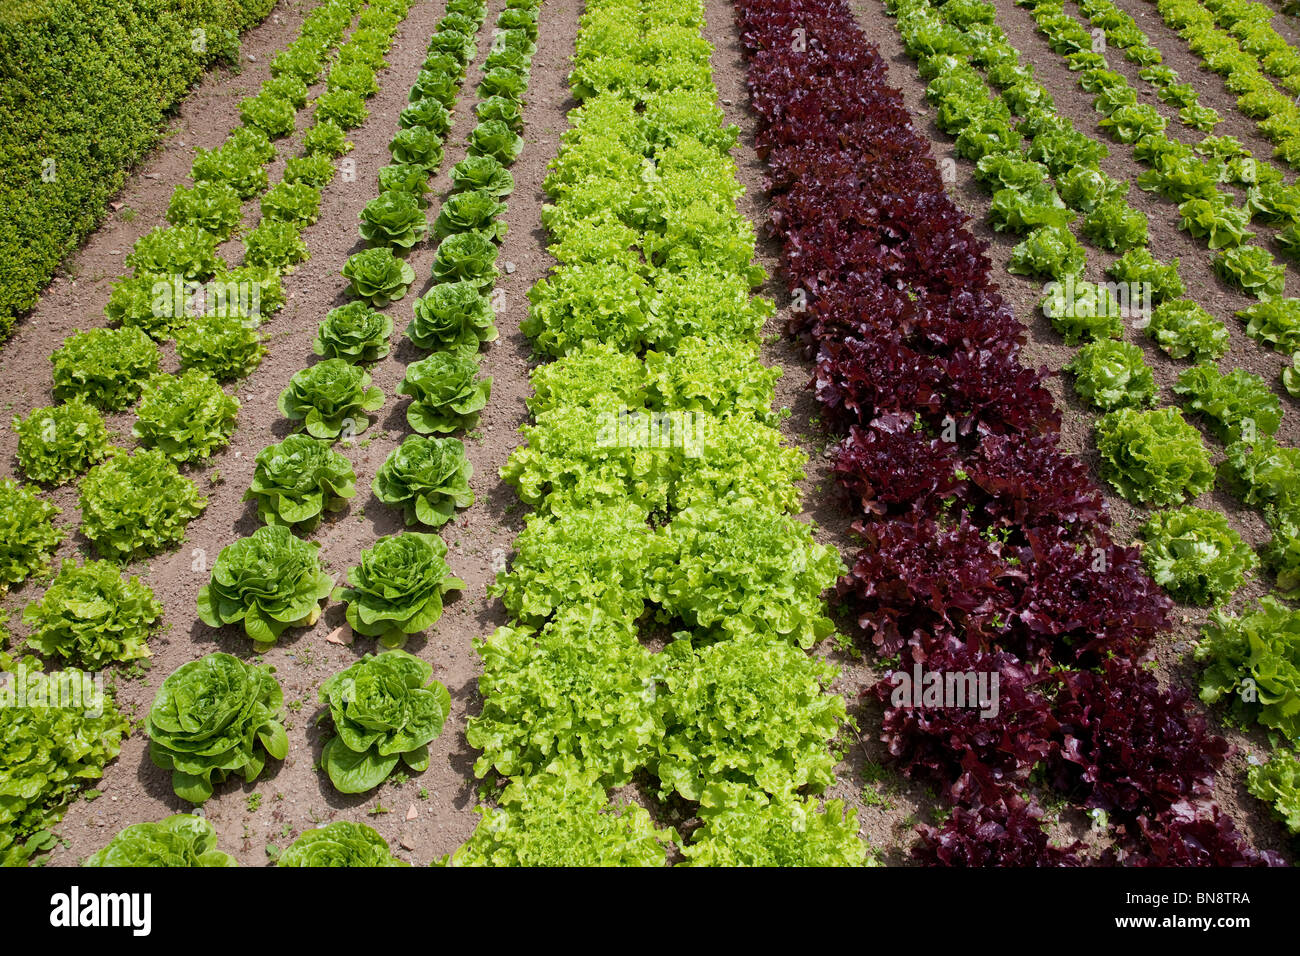 Immaculate lettuces growing in a well maintained vegetable garden Stock Photo